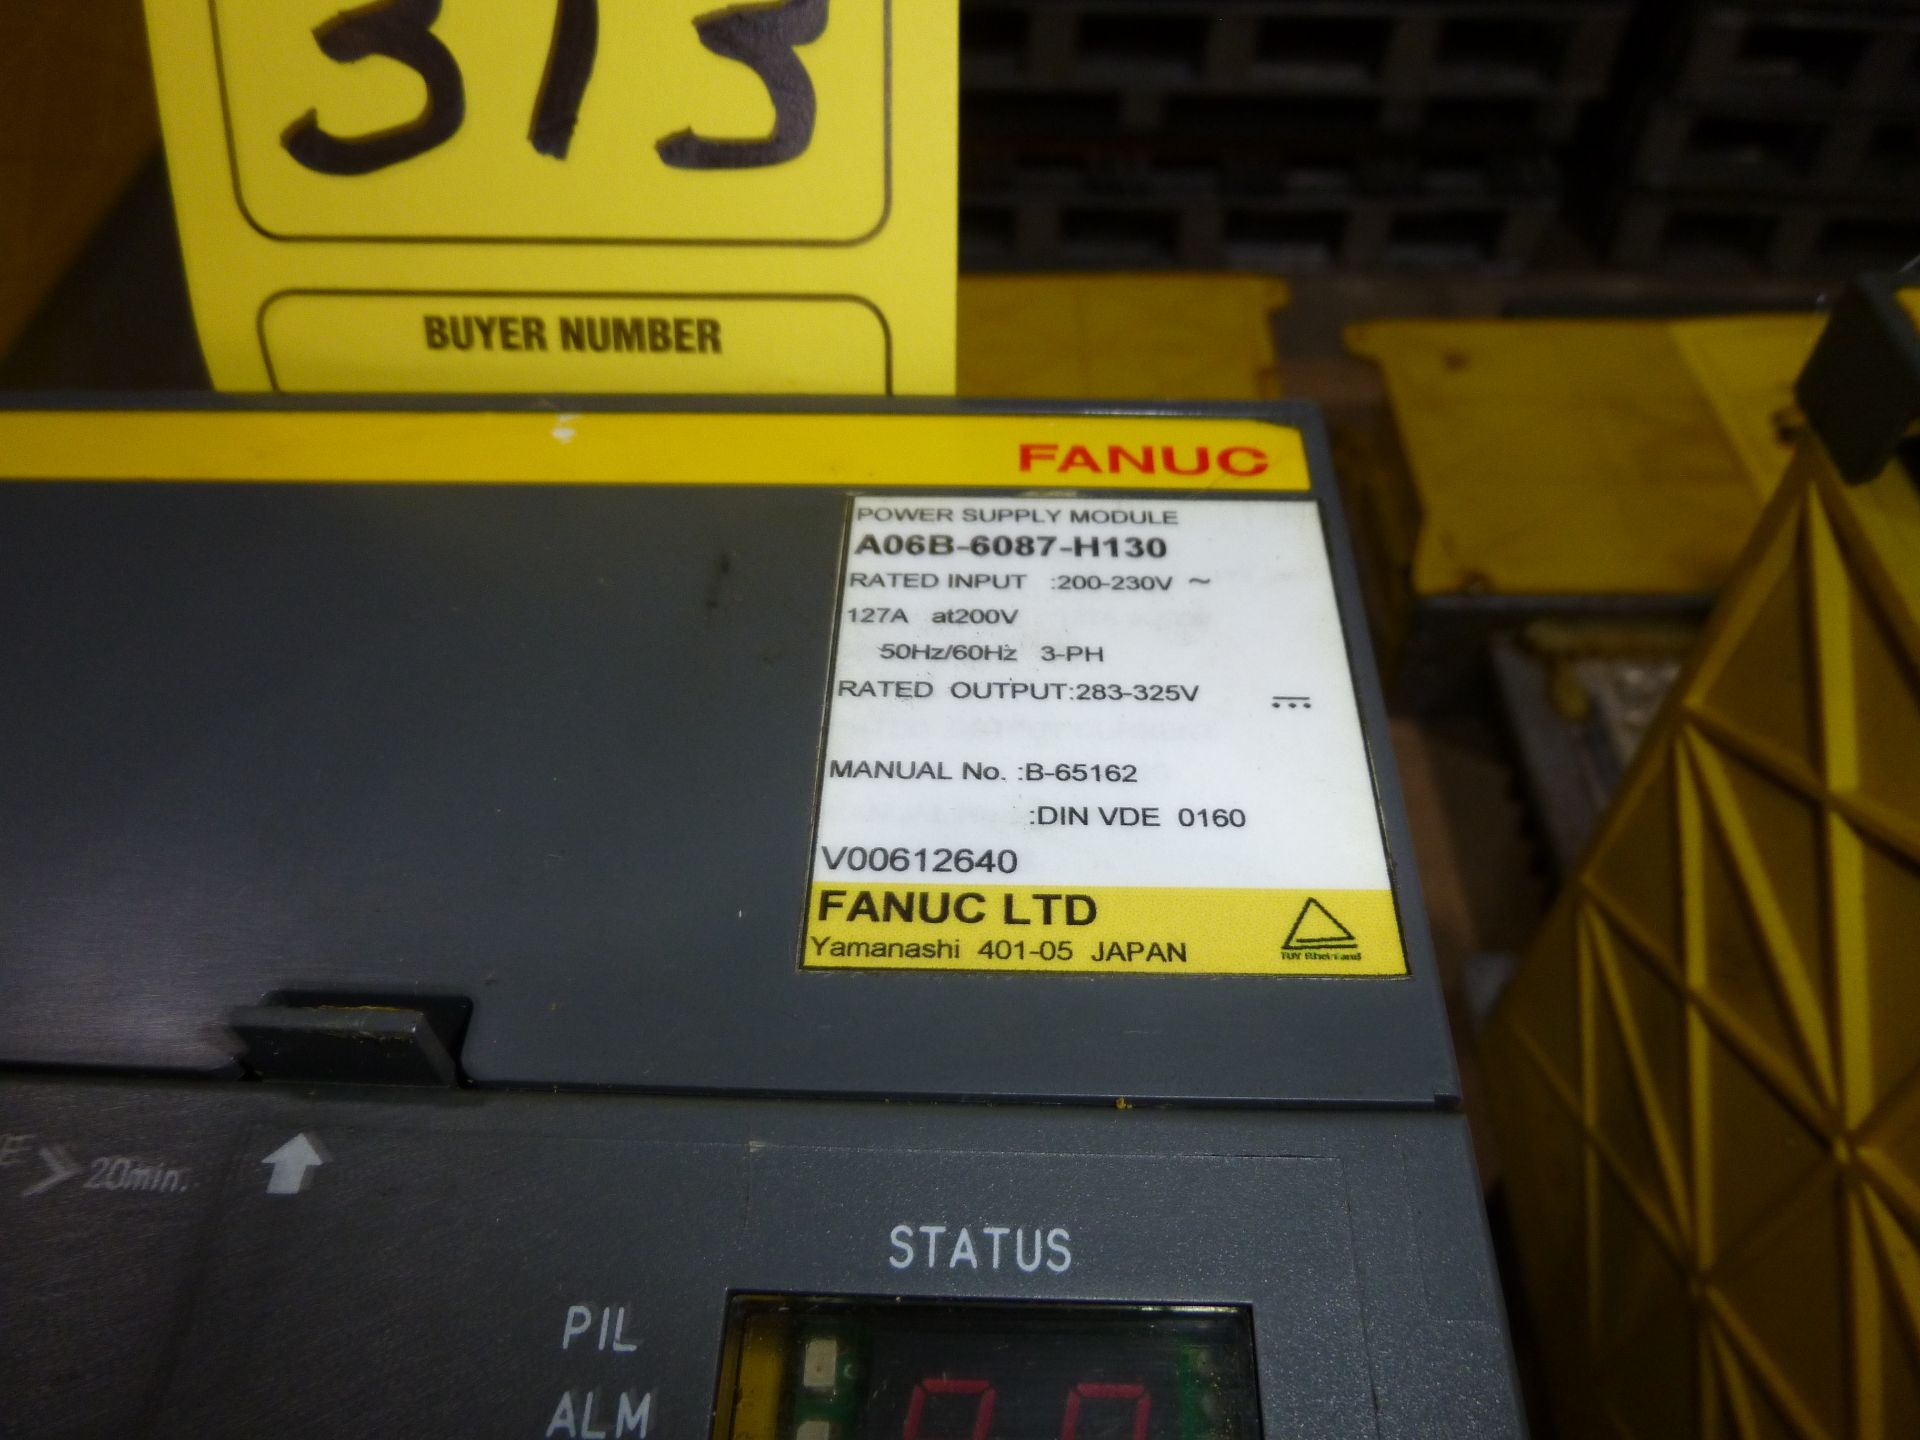 Fanuc power supply module model A06B-6087-H130, as always with Brolyn LLC auctions, all lots can - Image 2 of 2